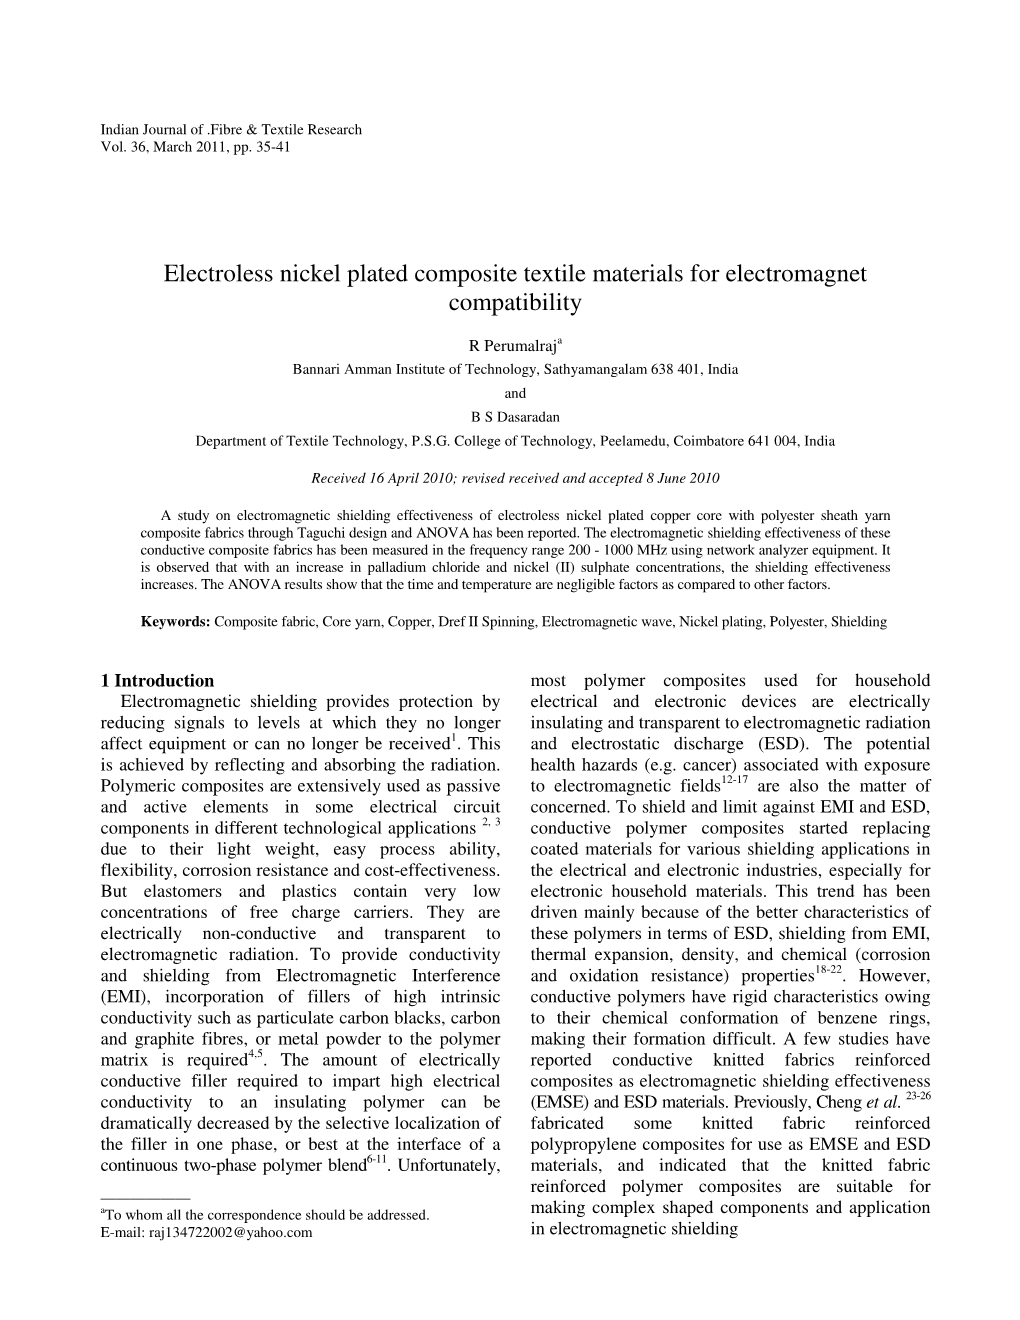 Electroless Nickel Plated Composite Textile Materials for Electromagnet Compatibility